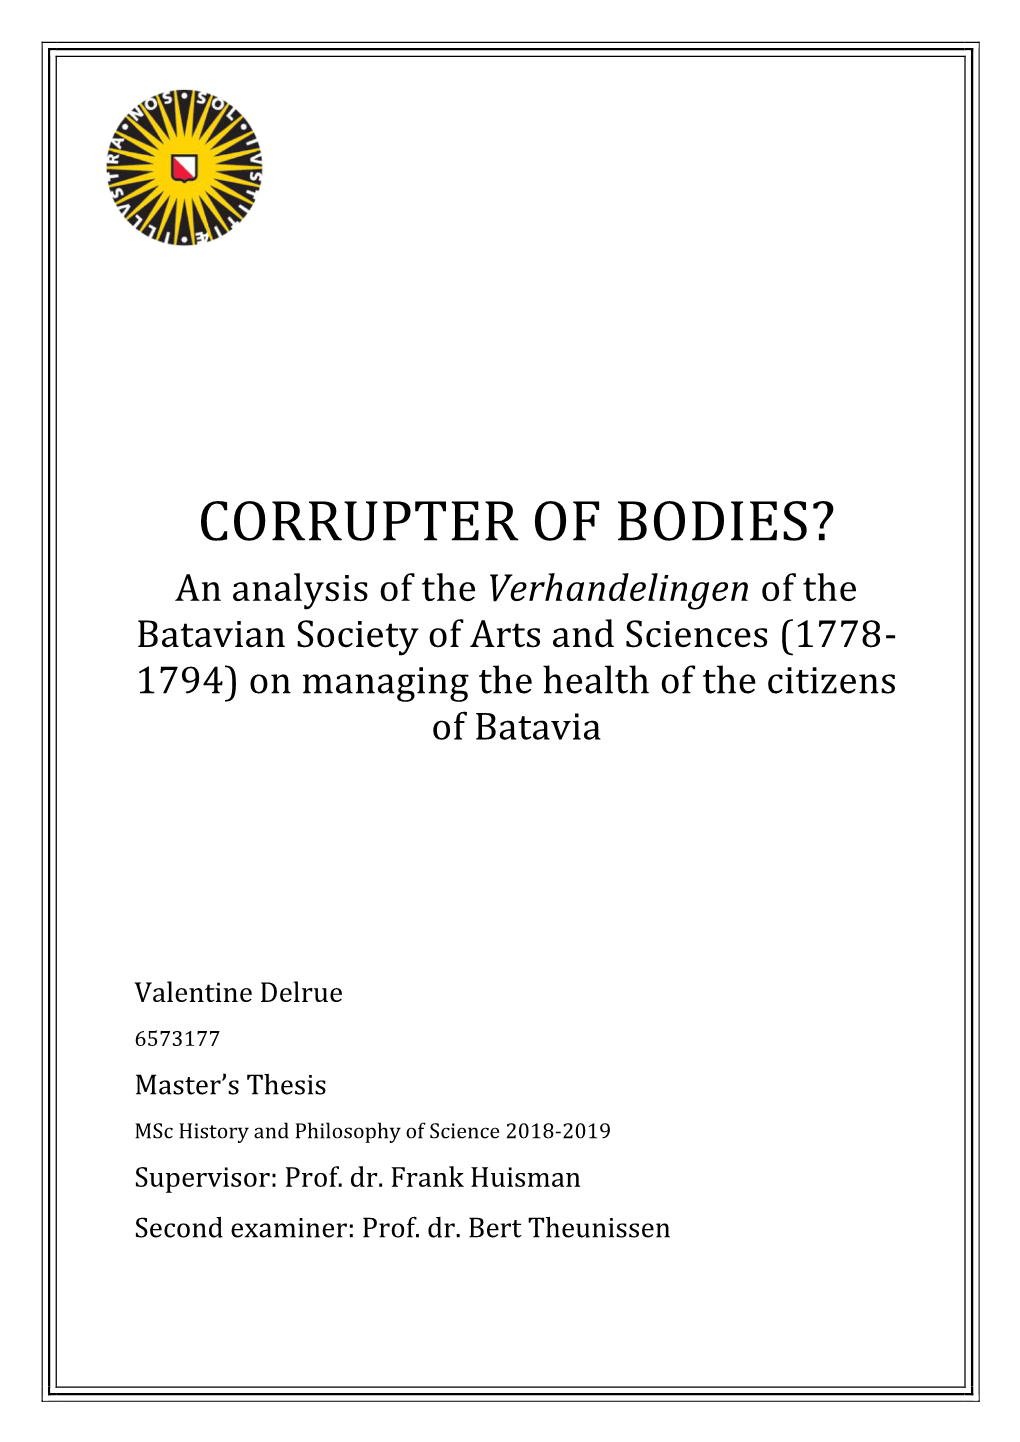 CORRUPTER of BODIES? an Analysis of the Verhandelingen of the Batavian Society of Arts and Sciences (1778- 1794) on Managing the Health of the Citizens of Batavia